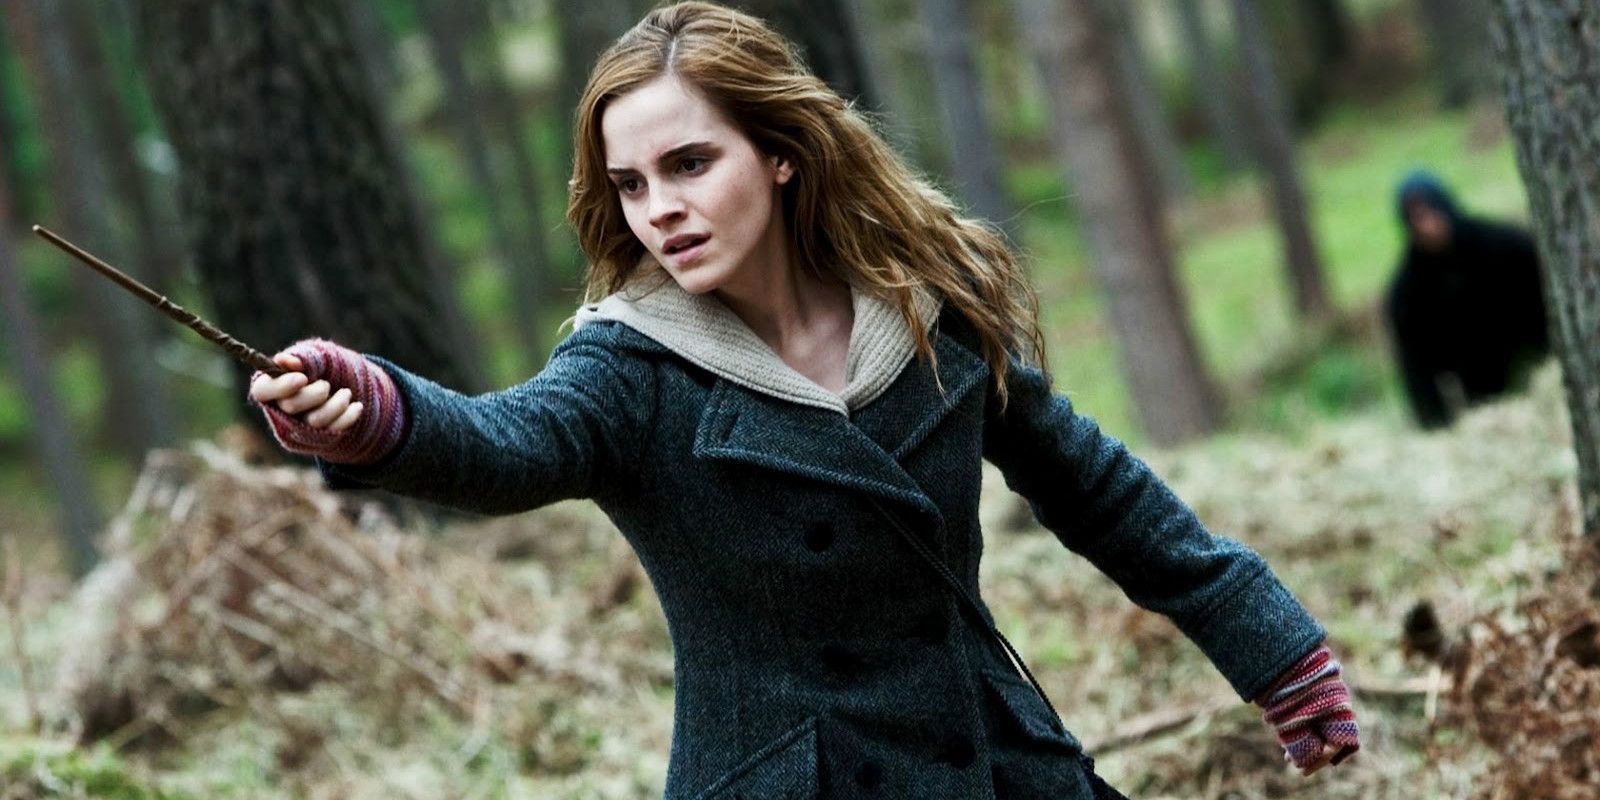 Hermione Granger holds her wand in the Forest of Dean